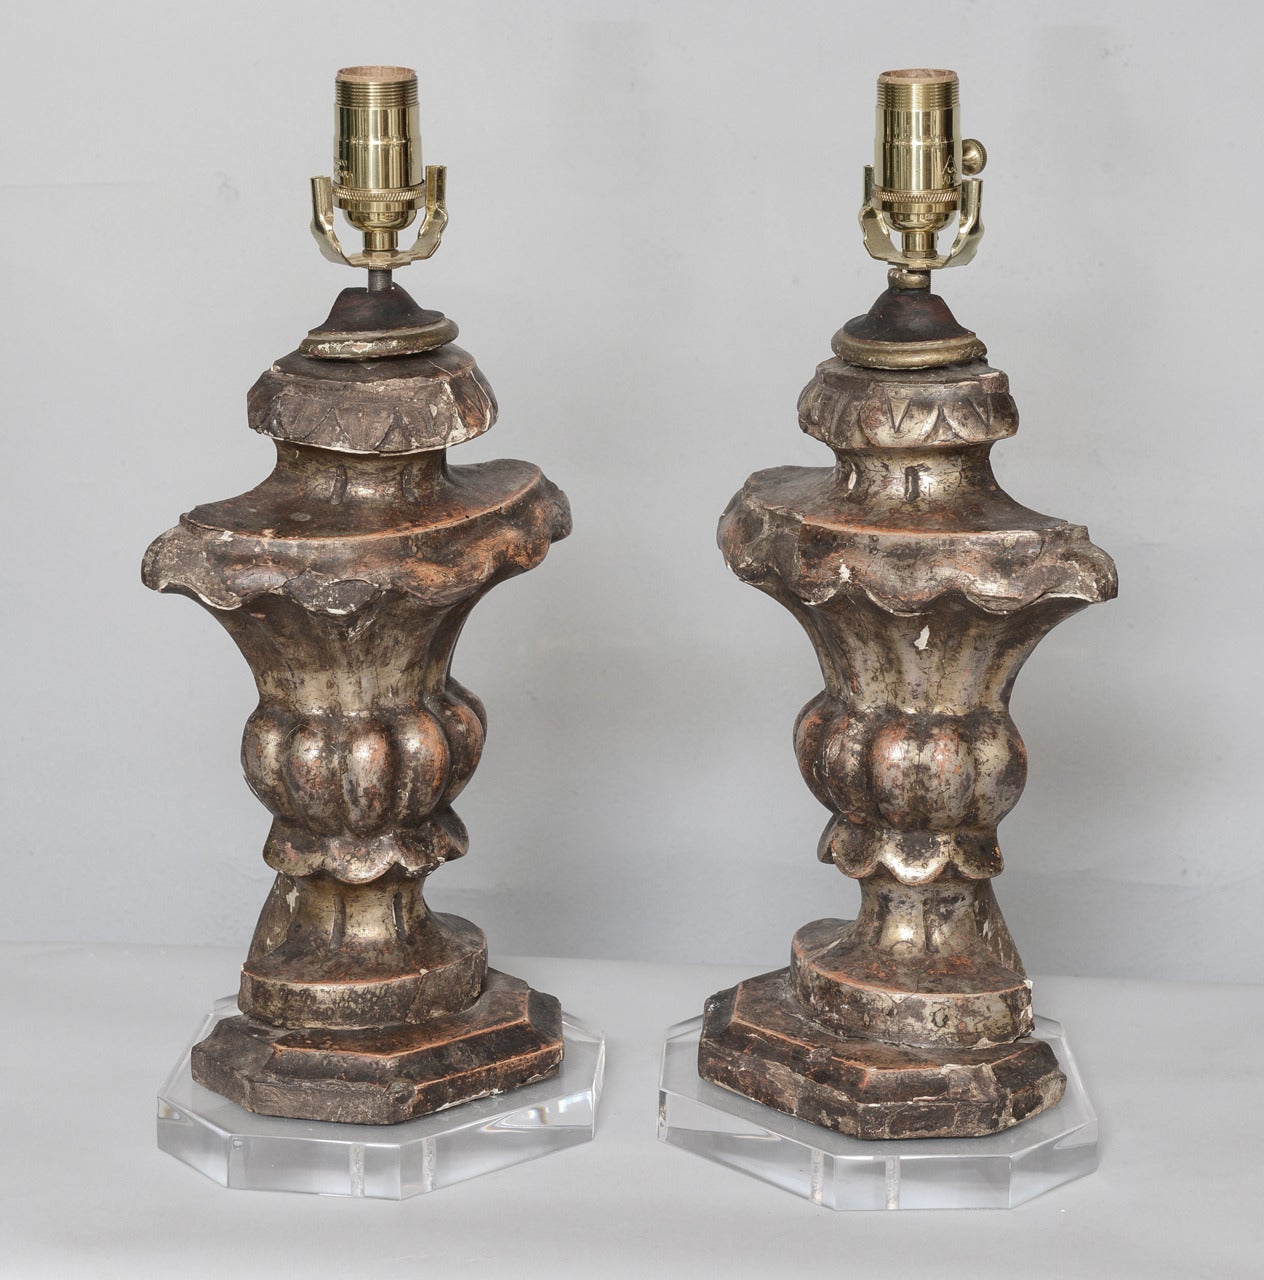 Pair of pricket bases, of silver giltwood, each carved into an urn shape with fluted socle on round foot.  Lamped on custom bases of Lucite.

Stock ID: D7230